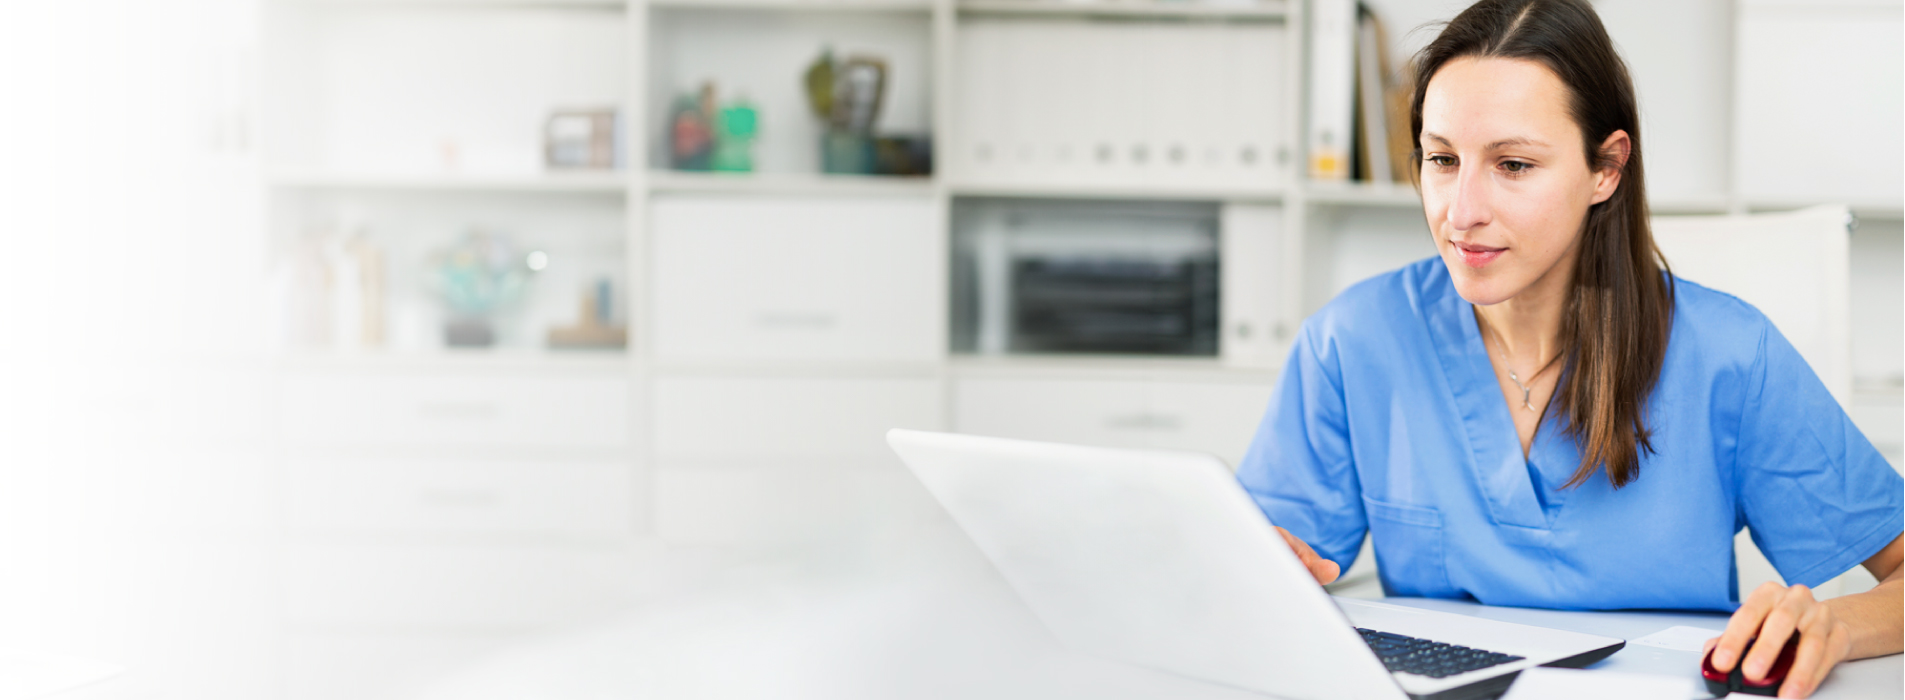 Photo of a female nurse with brown hair wearing blue medical scrubs working on her laptop